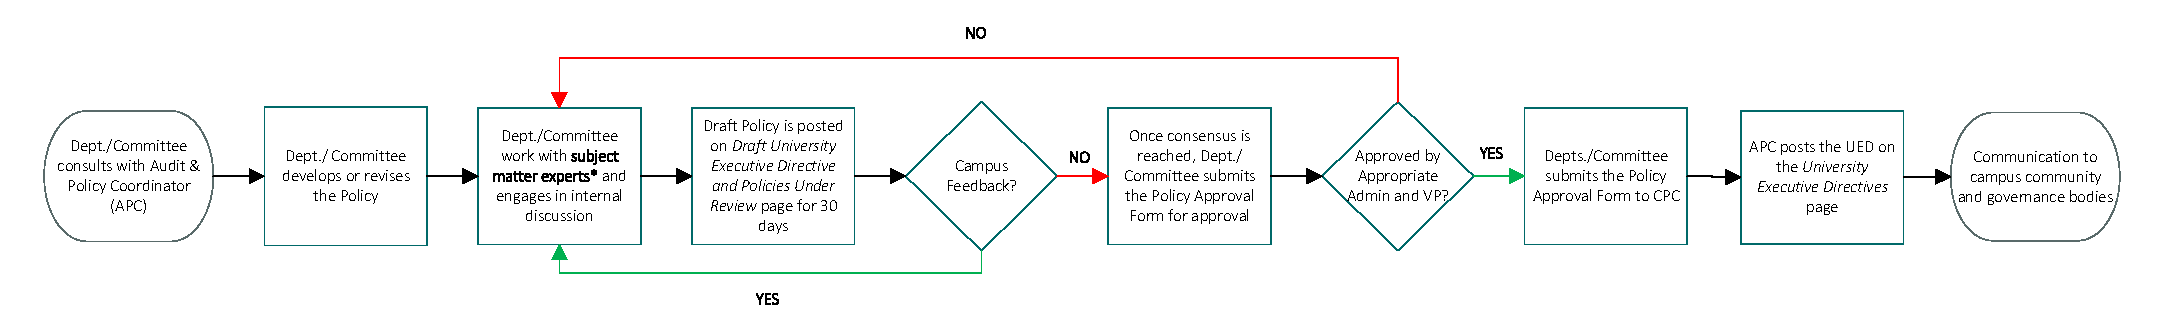 policy_approval_process